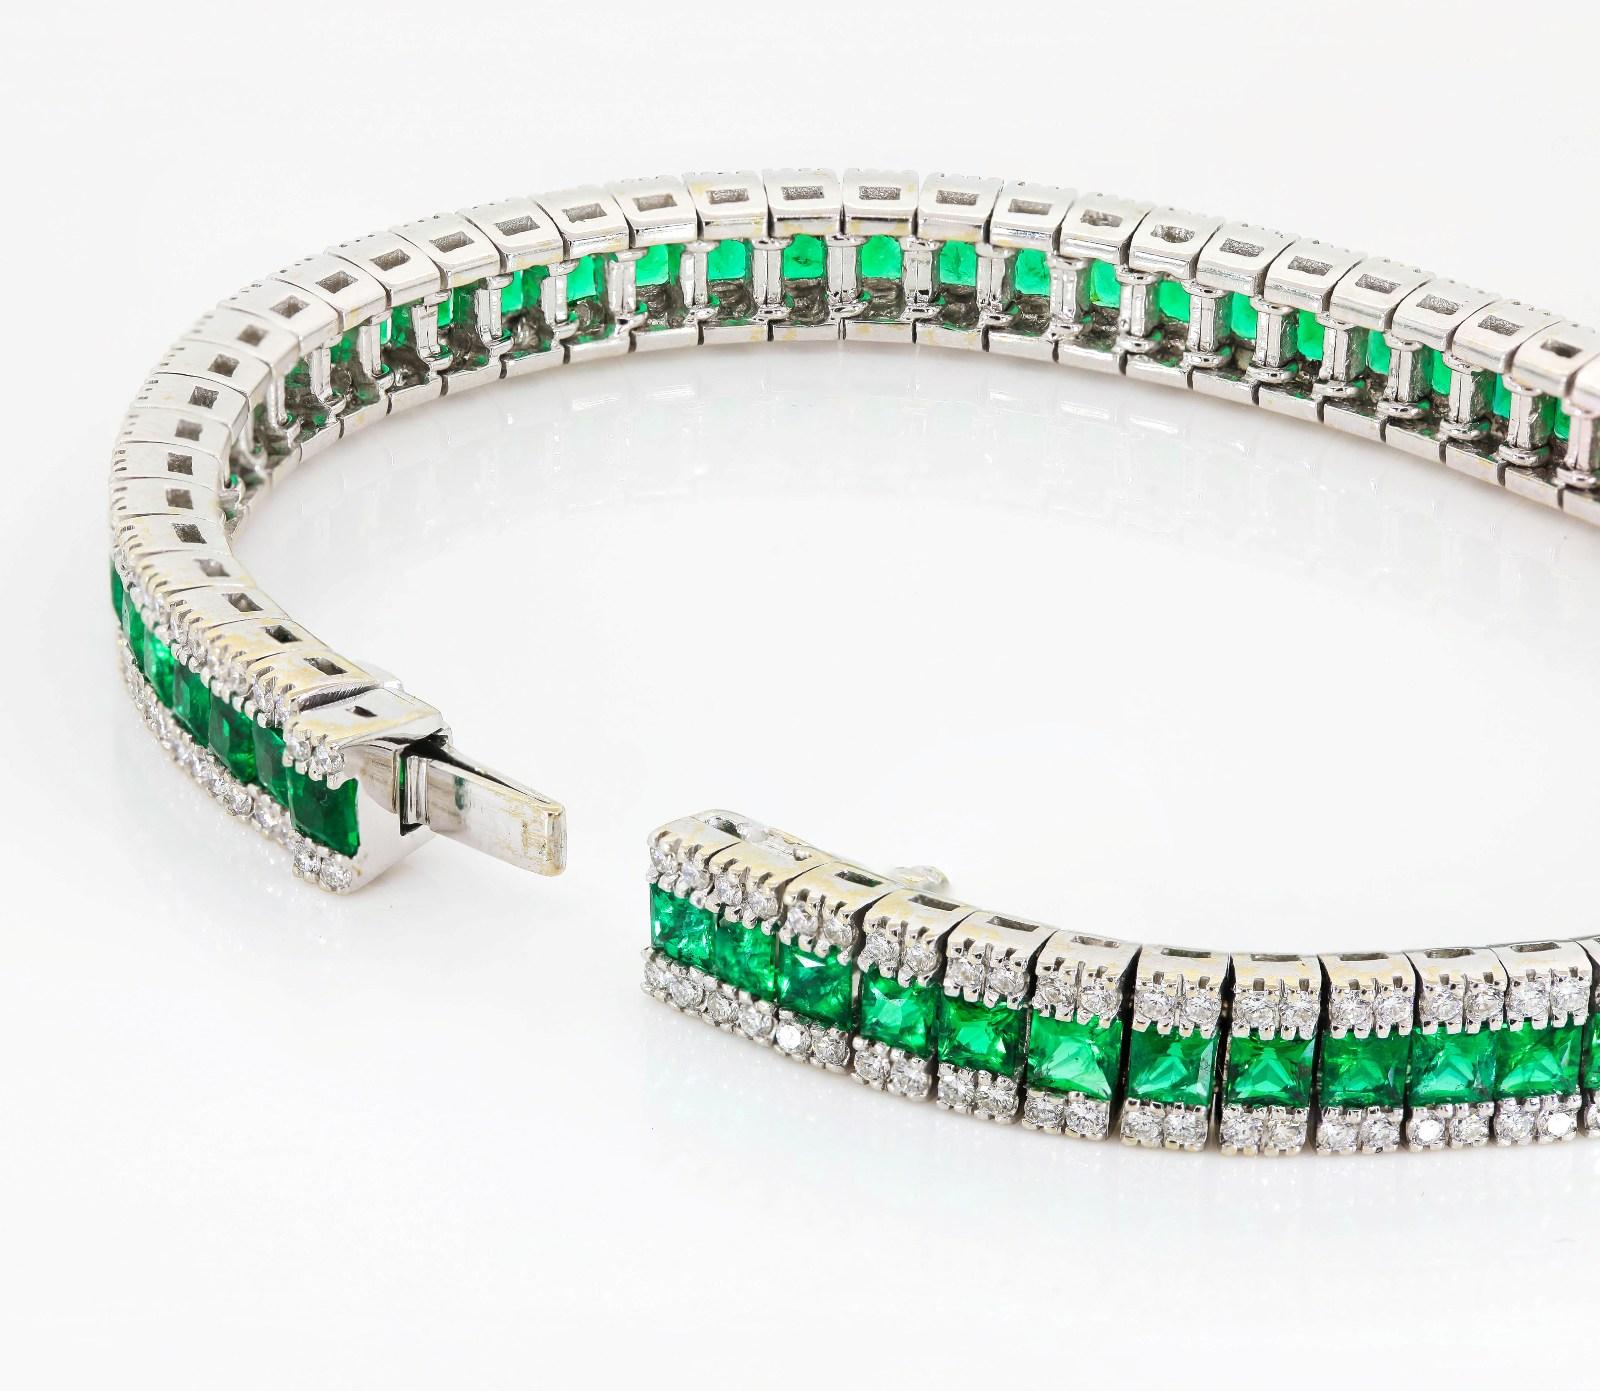 This stunning Italian made bracelet centers a row of resplendent French cut Colombian Emeralds weighing a grand 6.64 carats.  The Emeralds are flanked by two rows of Round Brilliant Cut Diamonds, all weighing 2.25 carats H color - VS clarity.  The